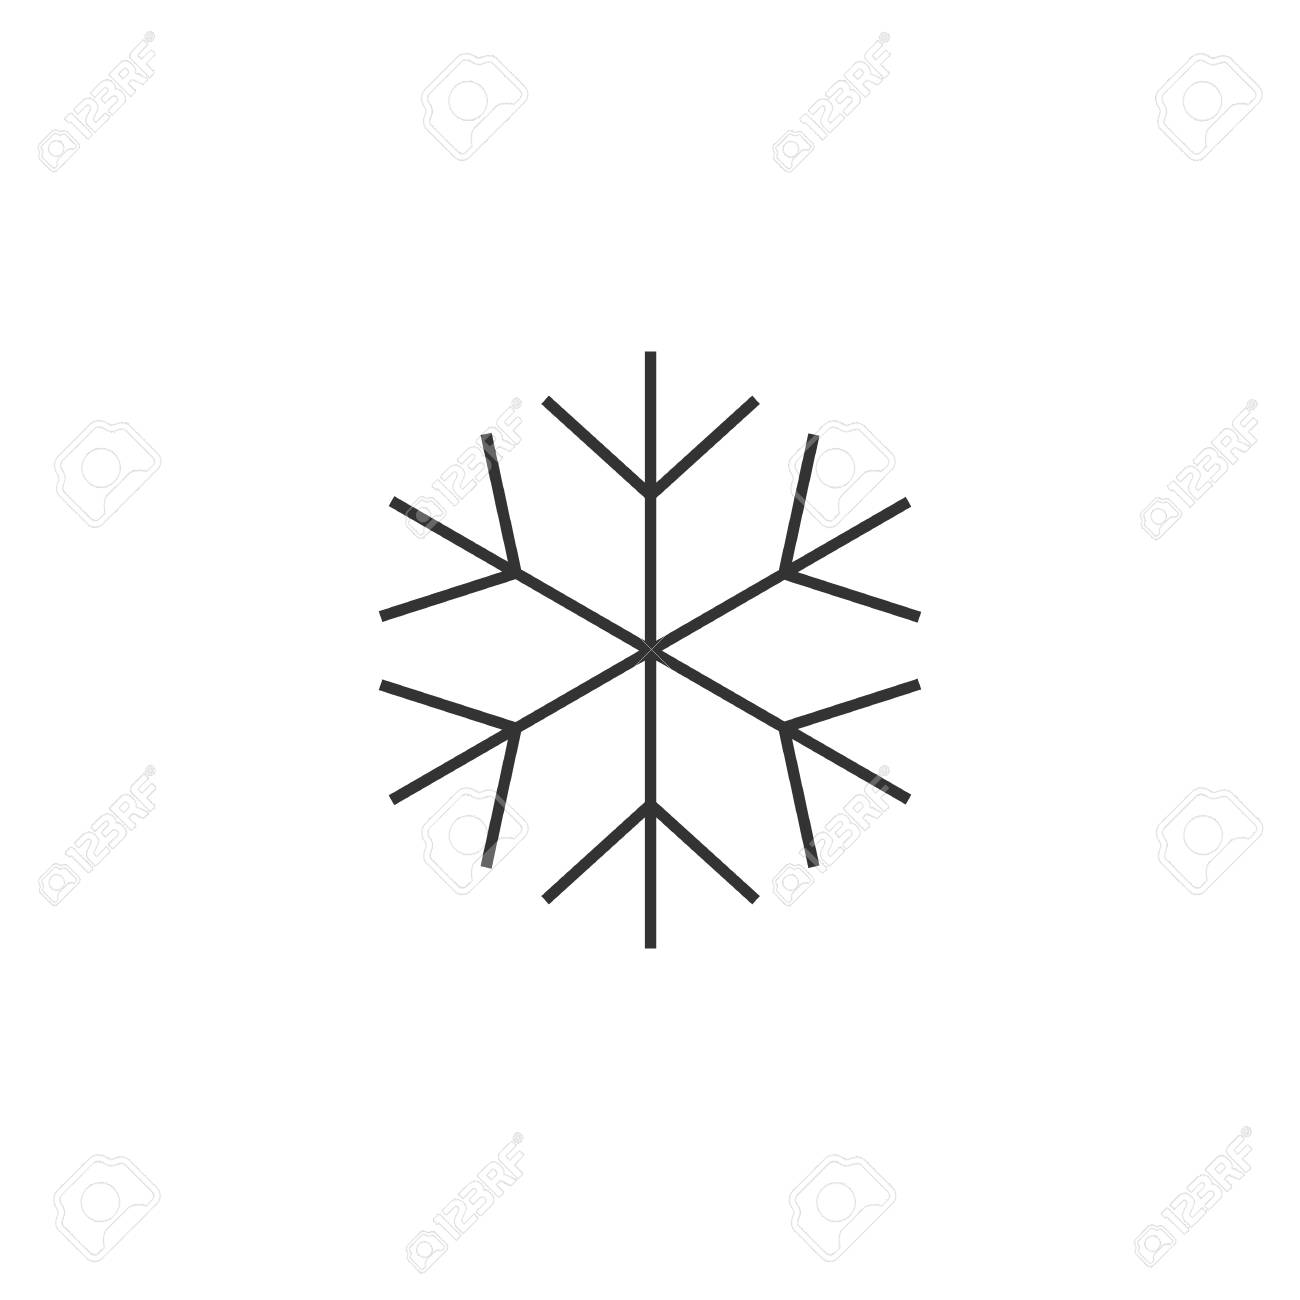 Snowflakes Clipart december 8.